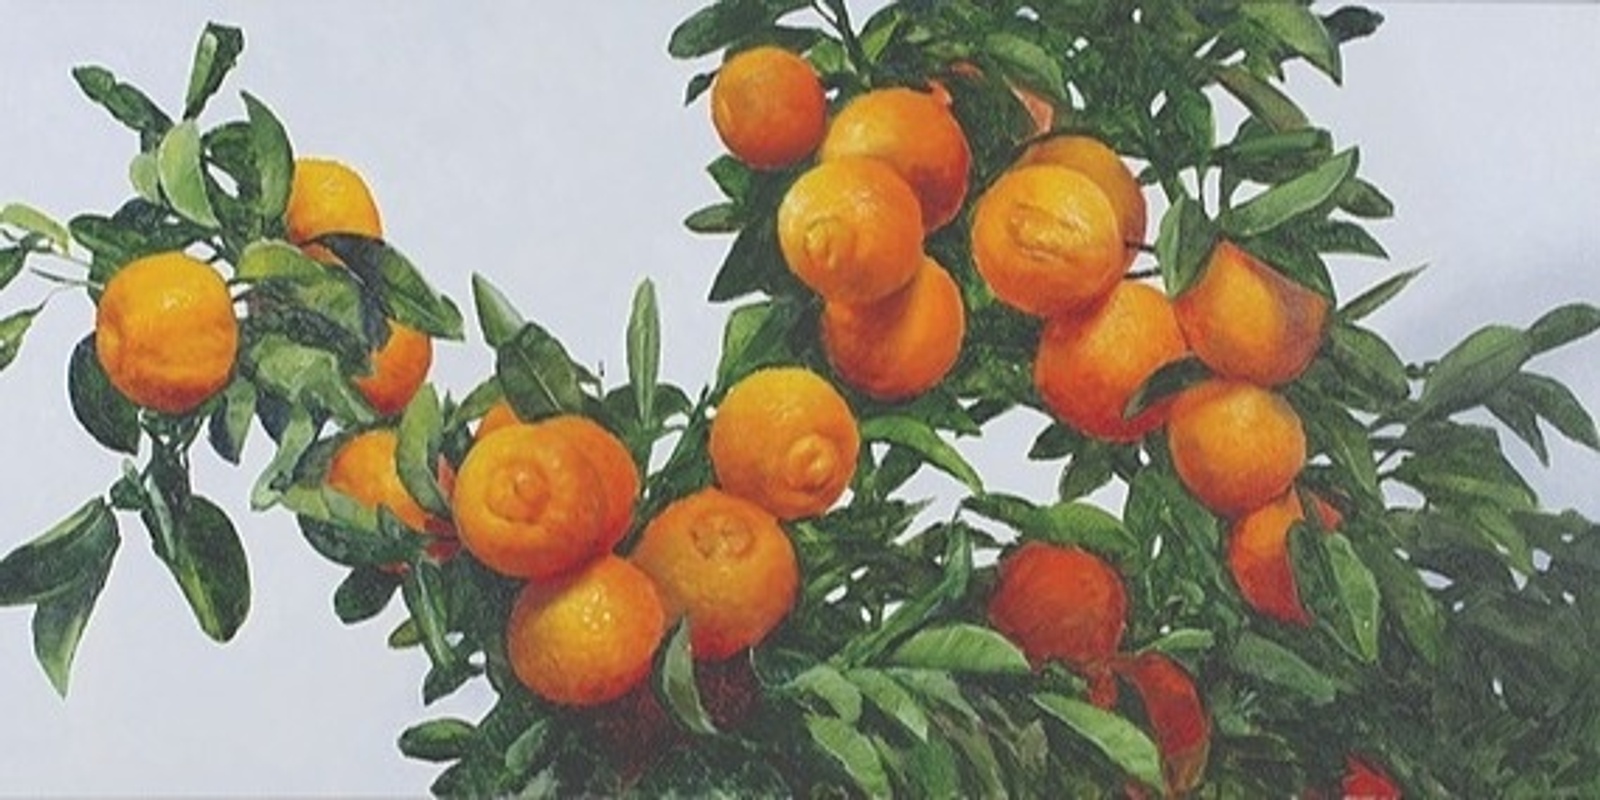 Banner image for Lunch Society - Unlemon: A Meandering Tale of Citrus